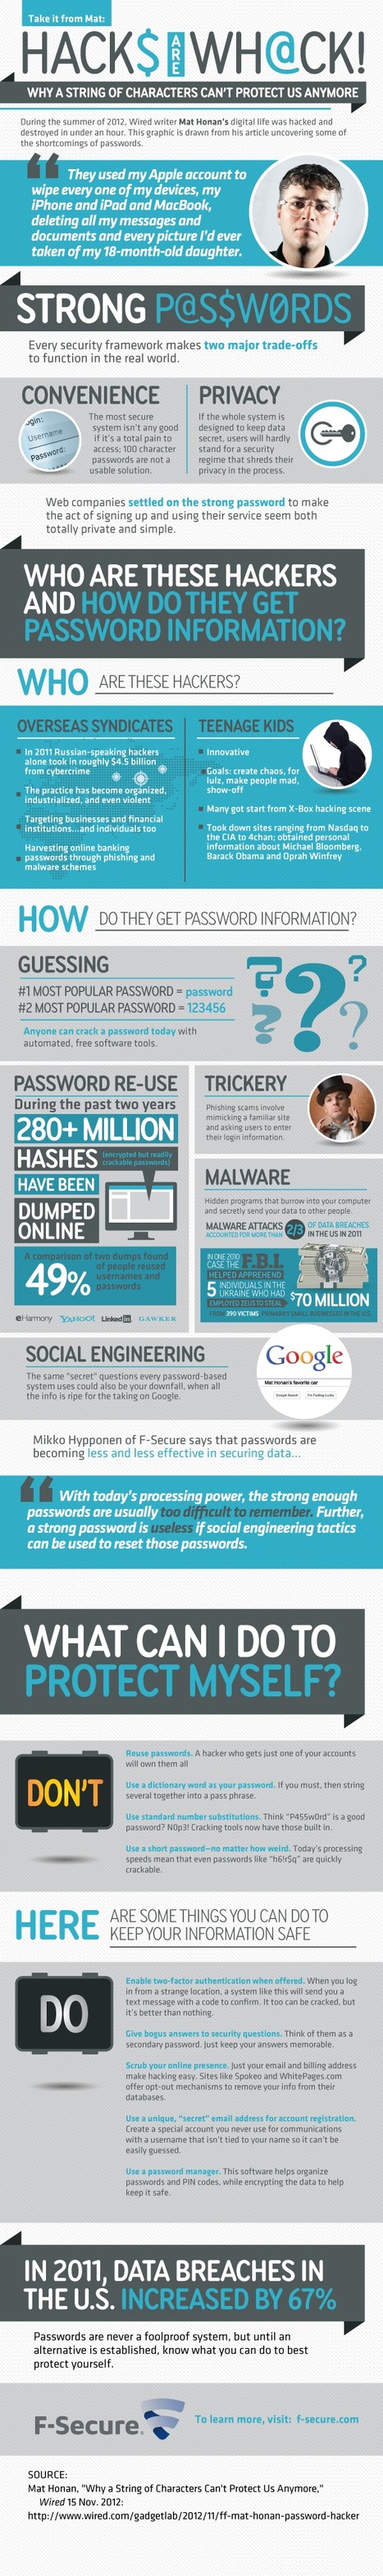 Hacking lessons learned: how to cover your digital ass [Infographic] | ICT Security-Sécurité PC et Internet | Scoop.it